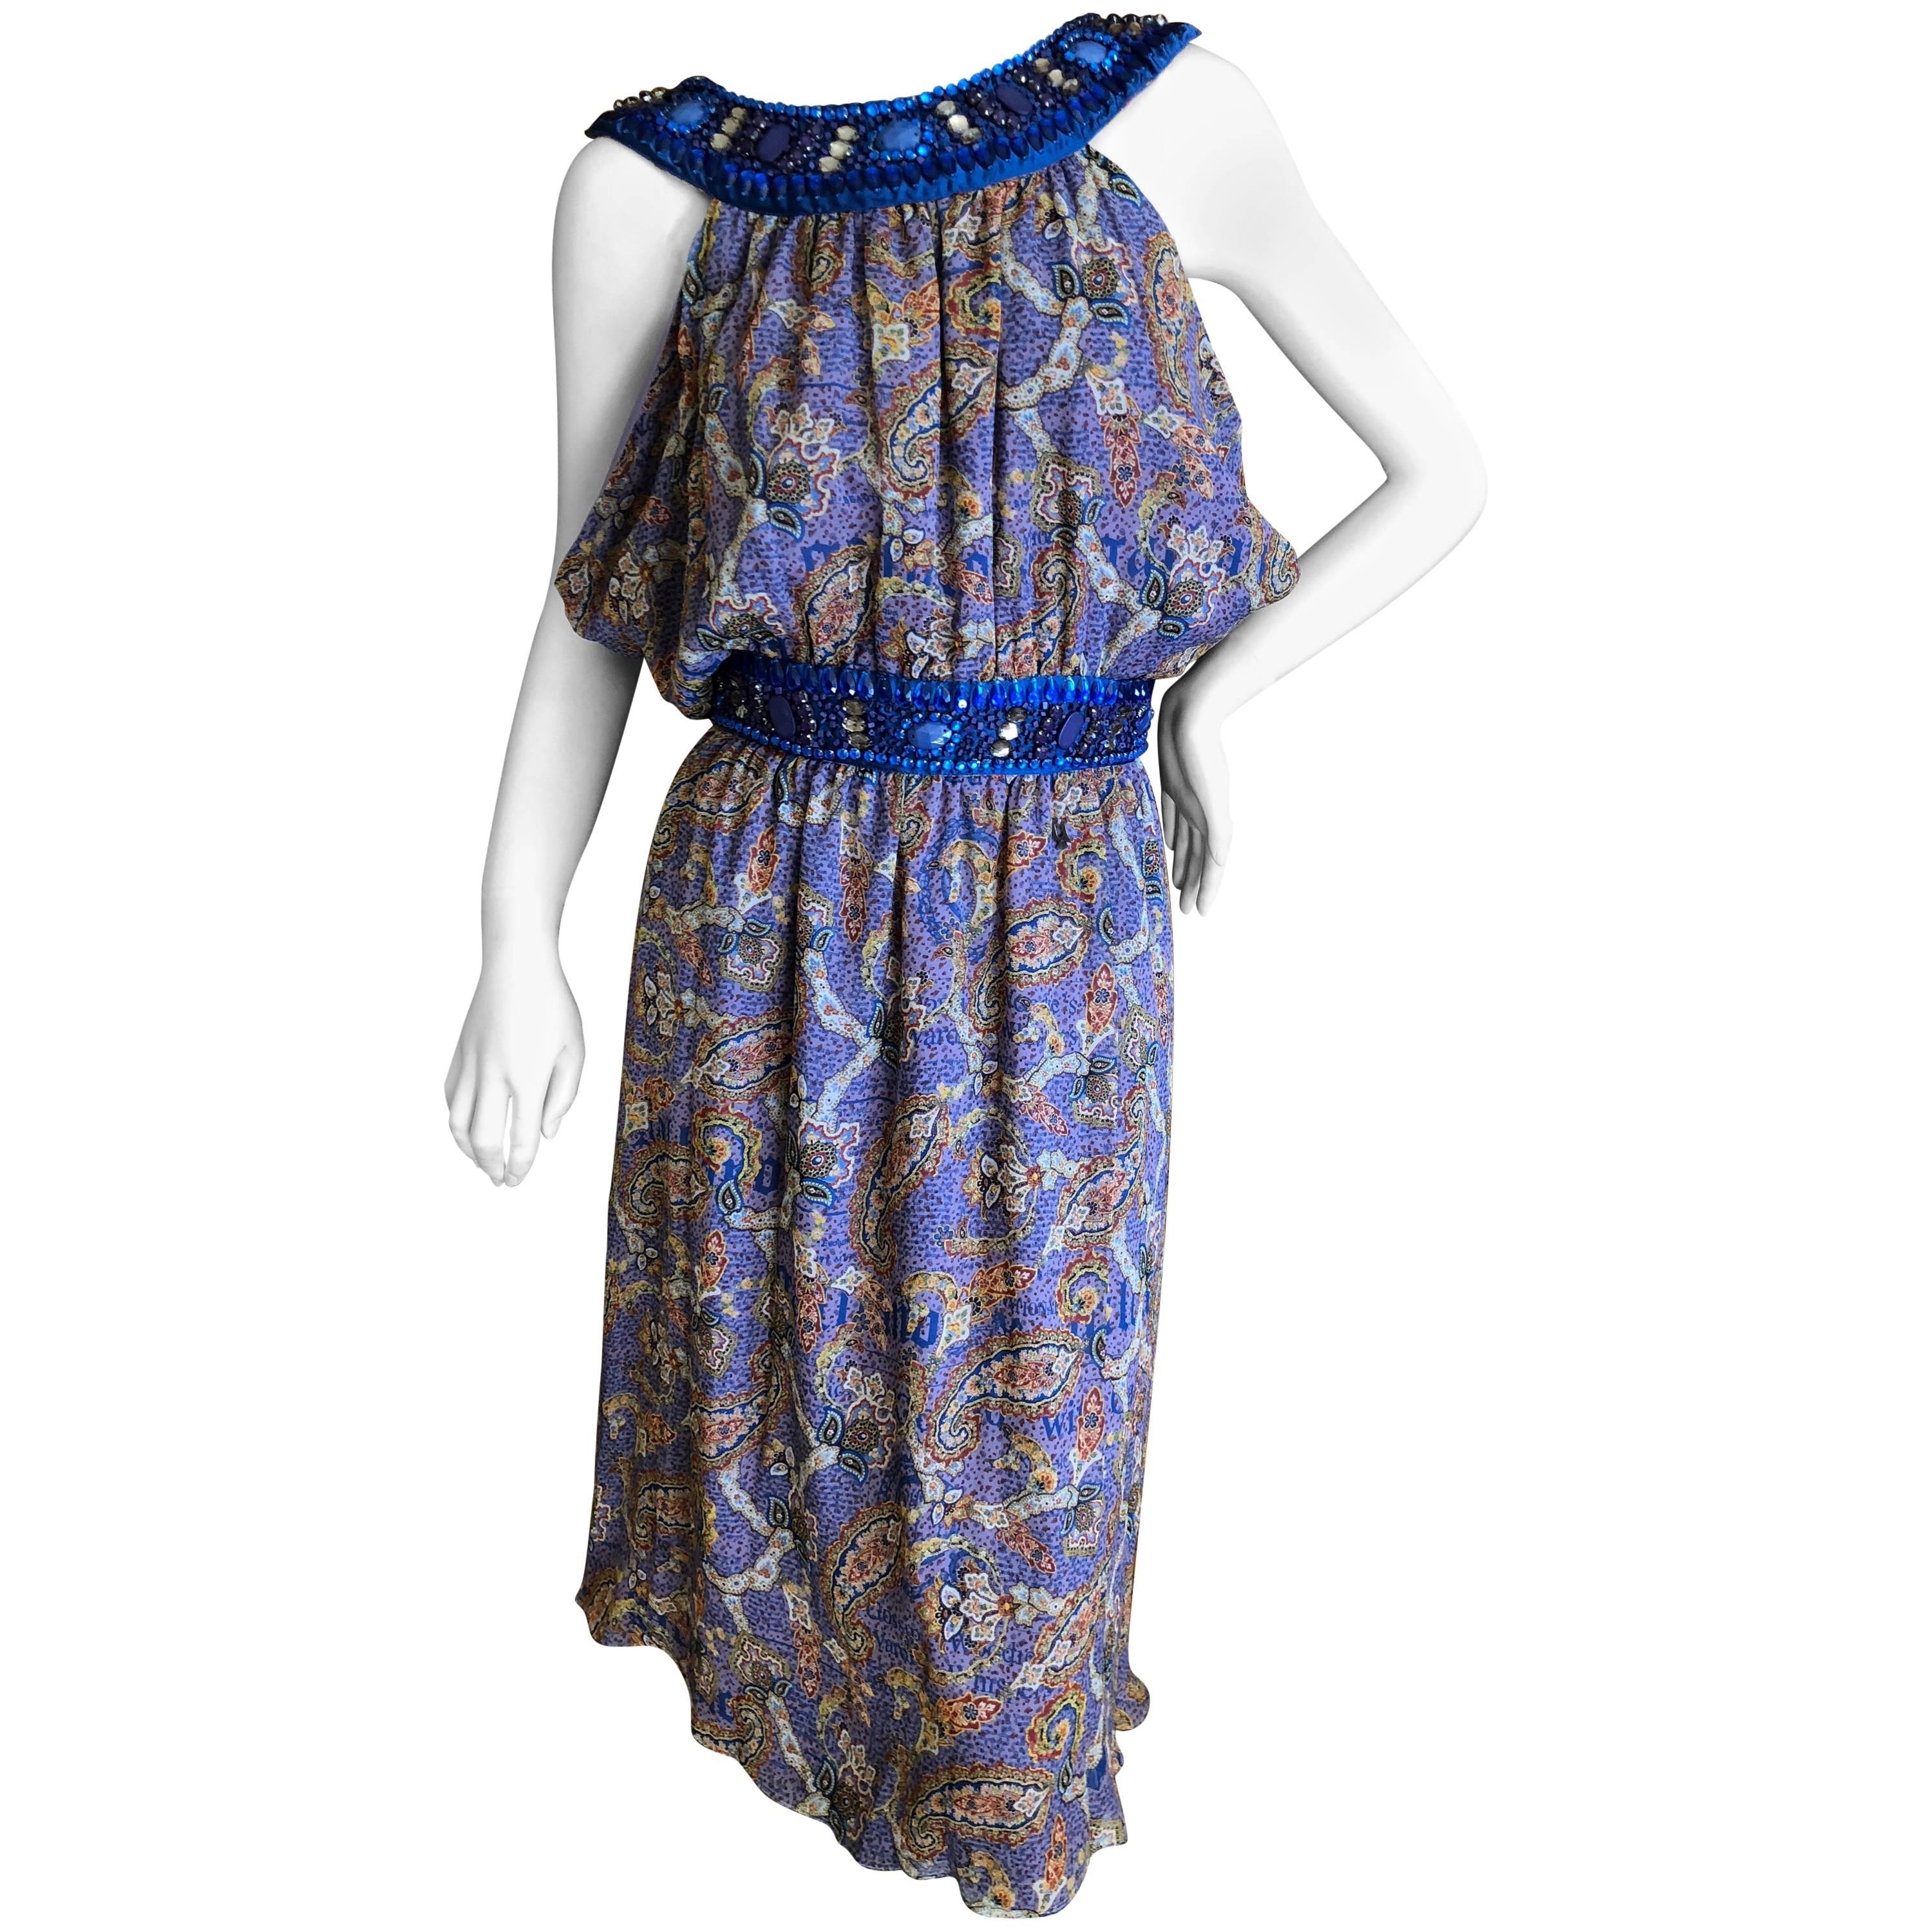 John Galliano Exquisite Jewel Embellished Silk Paisley Dress NWT For Sale